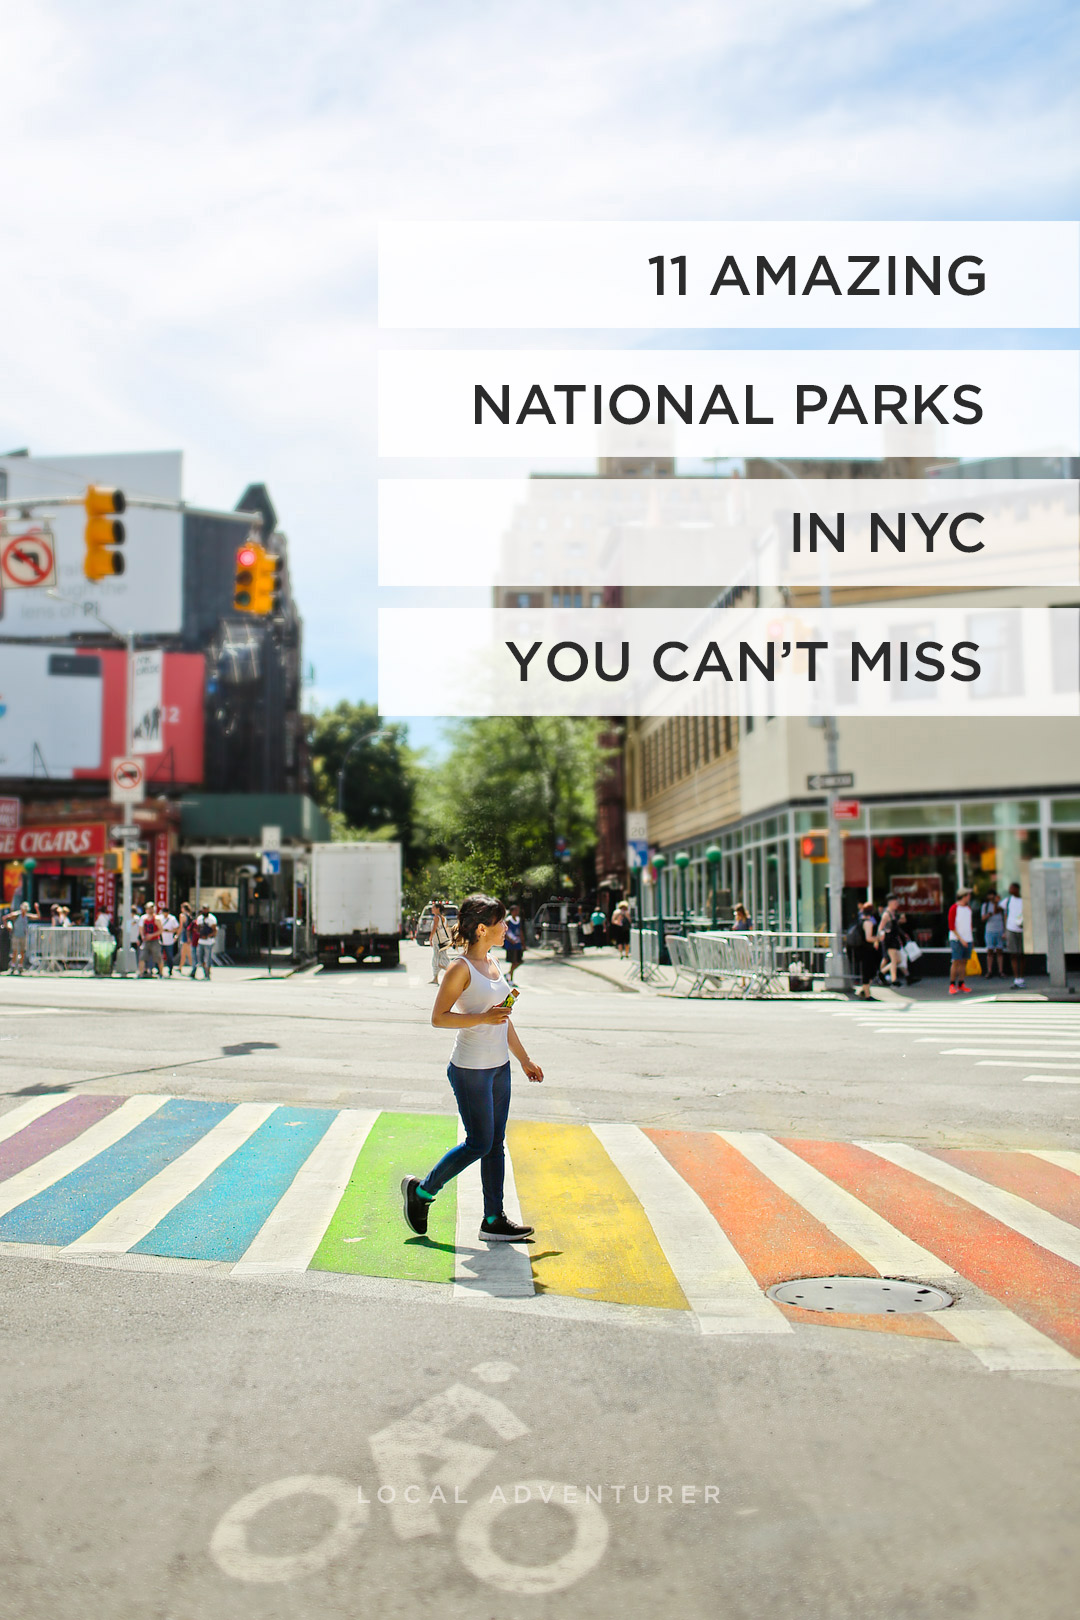 Traveling to New York? Save this pin and click through to see our ultimate guide to 11 national parks in new york city plus a complete list of NYs parks. We'll give you details of each, including when they are open, insider tips, and details like the statue of liberty location. If you're looking to escape the city, we also include a list of upstate New York parks, the best ny state parks, and best national monuments in New York. // Local Adventurer Local Adventurer #seeyourcity #nycgo #nyc #iloveny #newyork #newyorkcity #visittheusa